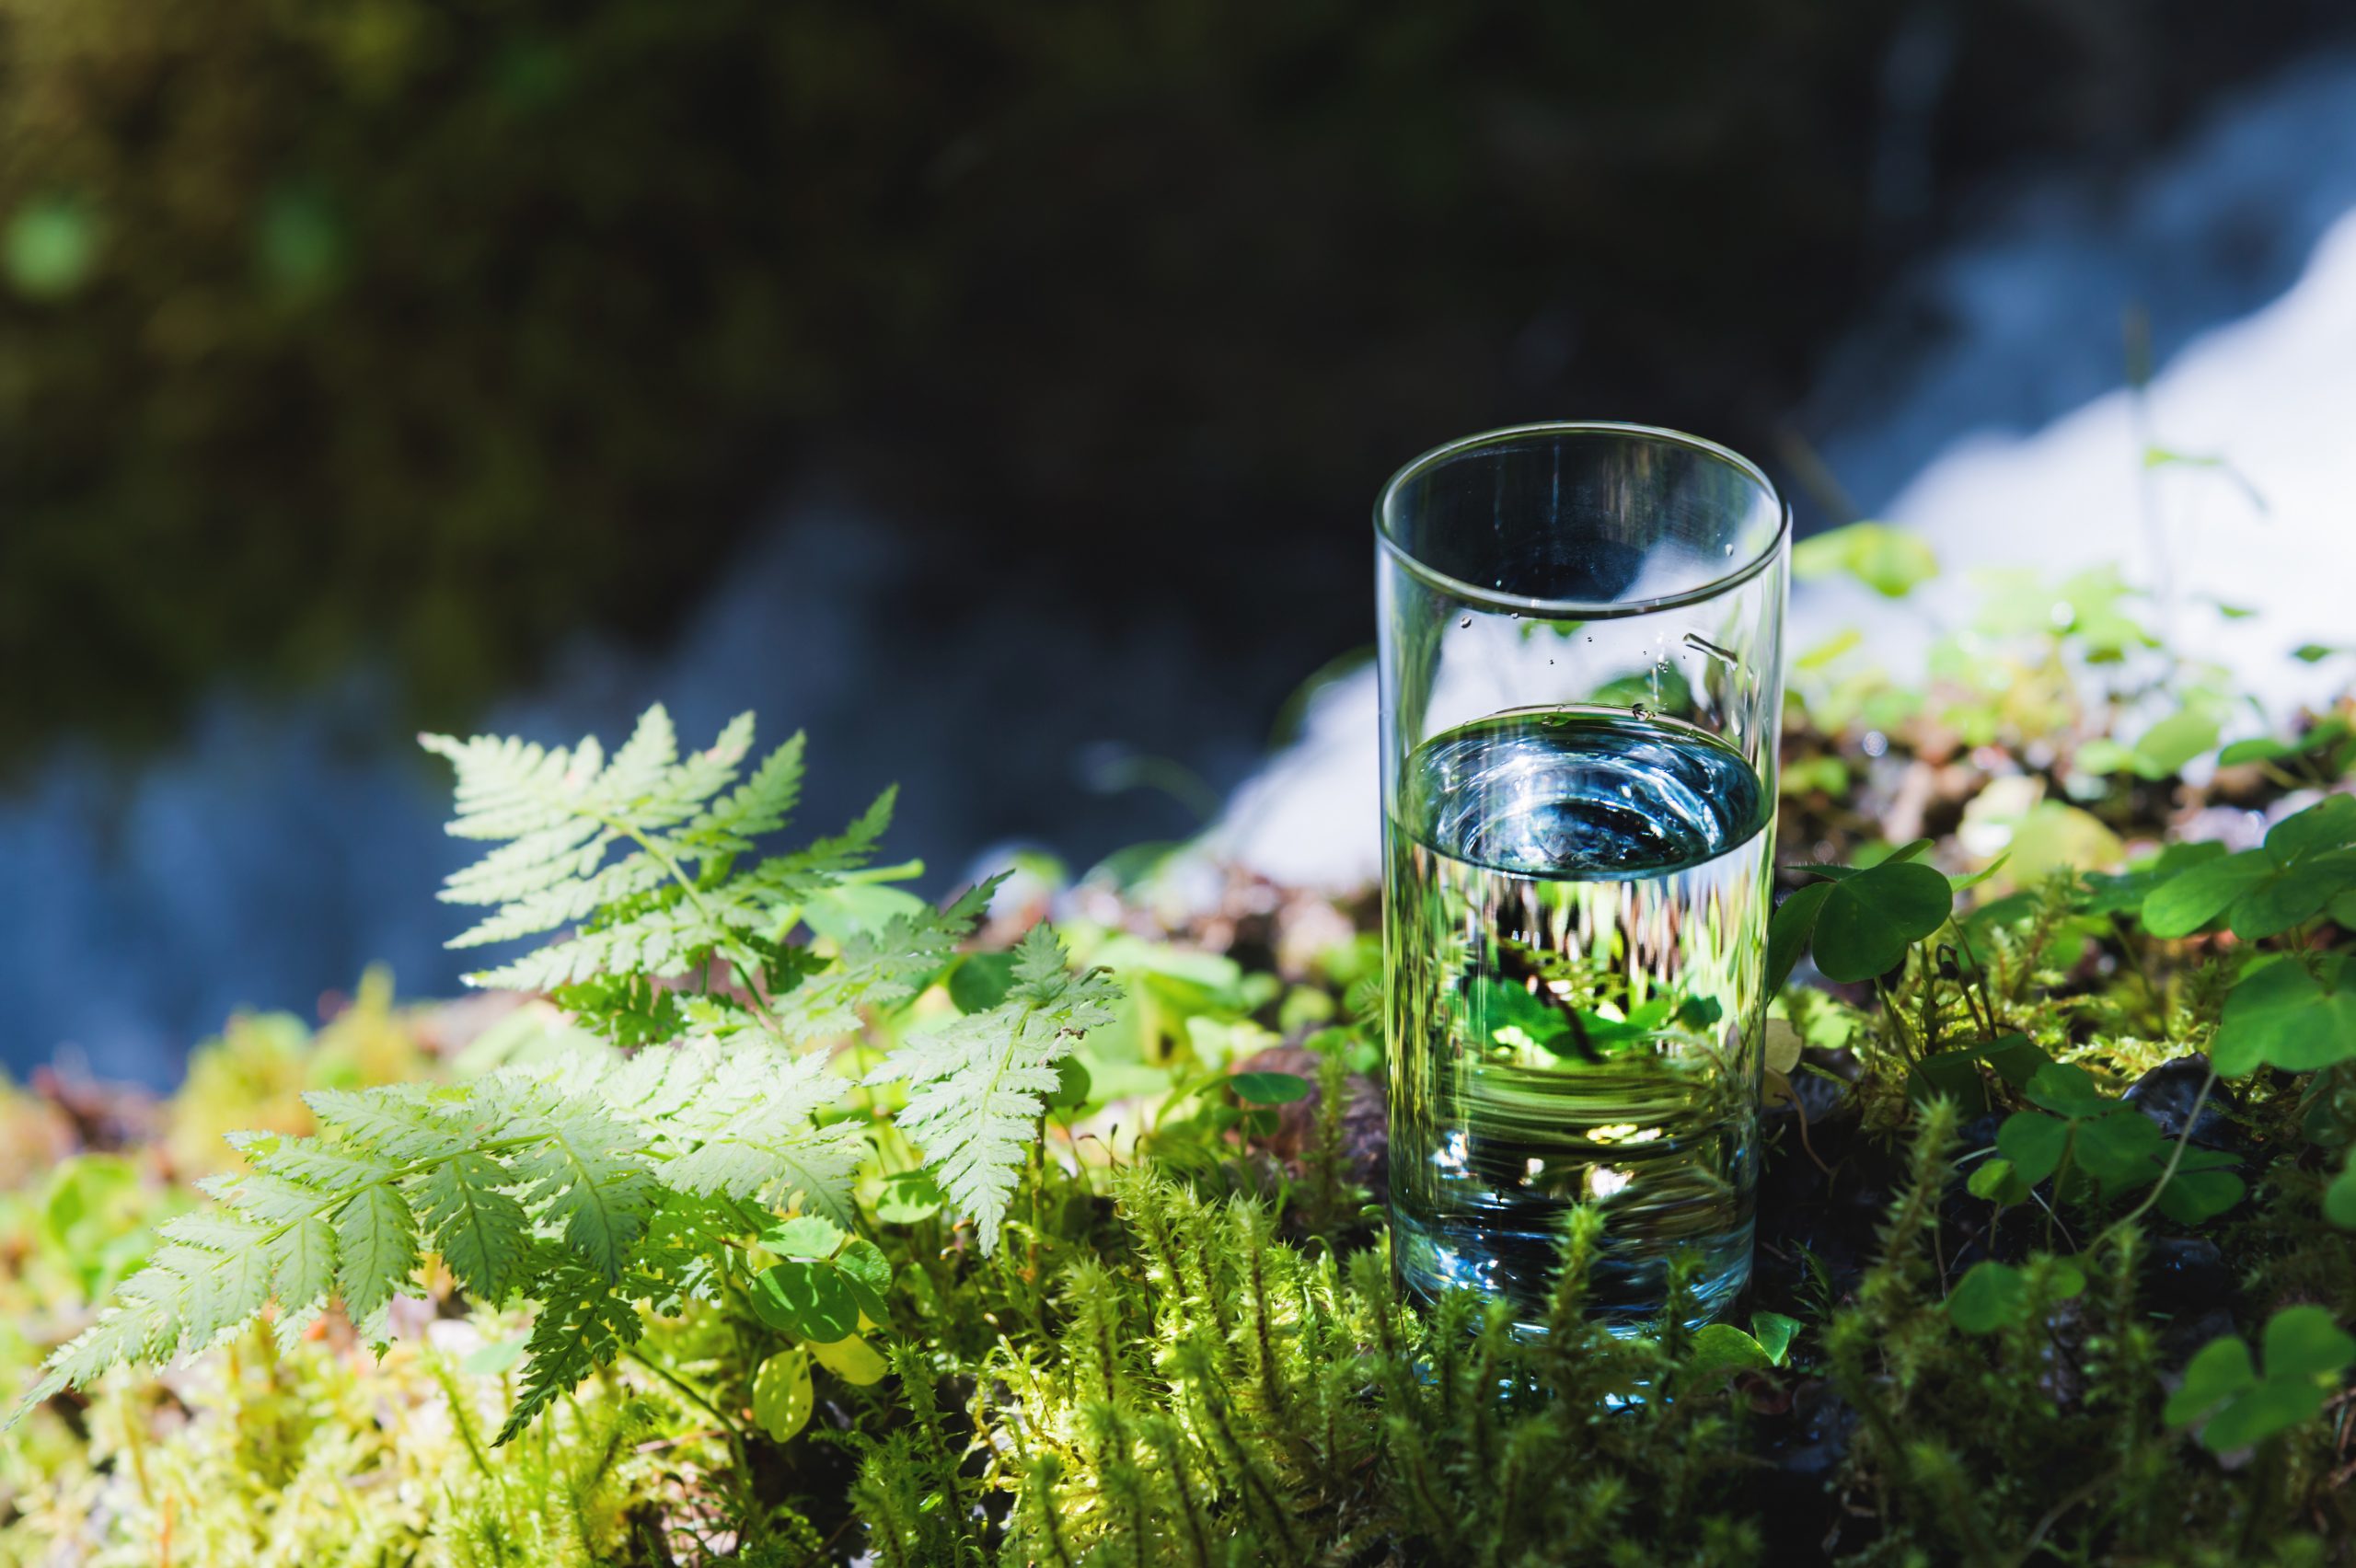 Clear water in a clear glass against a background of green moss with a mountain river in the background. Healthy food and environmentally friendly natural water.